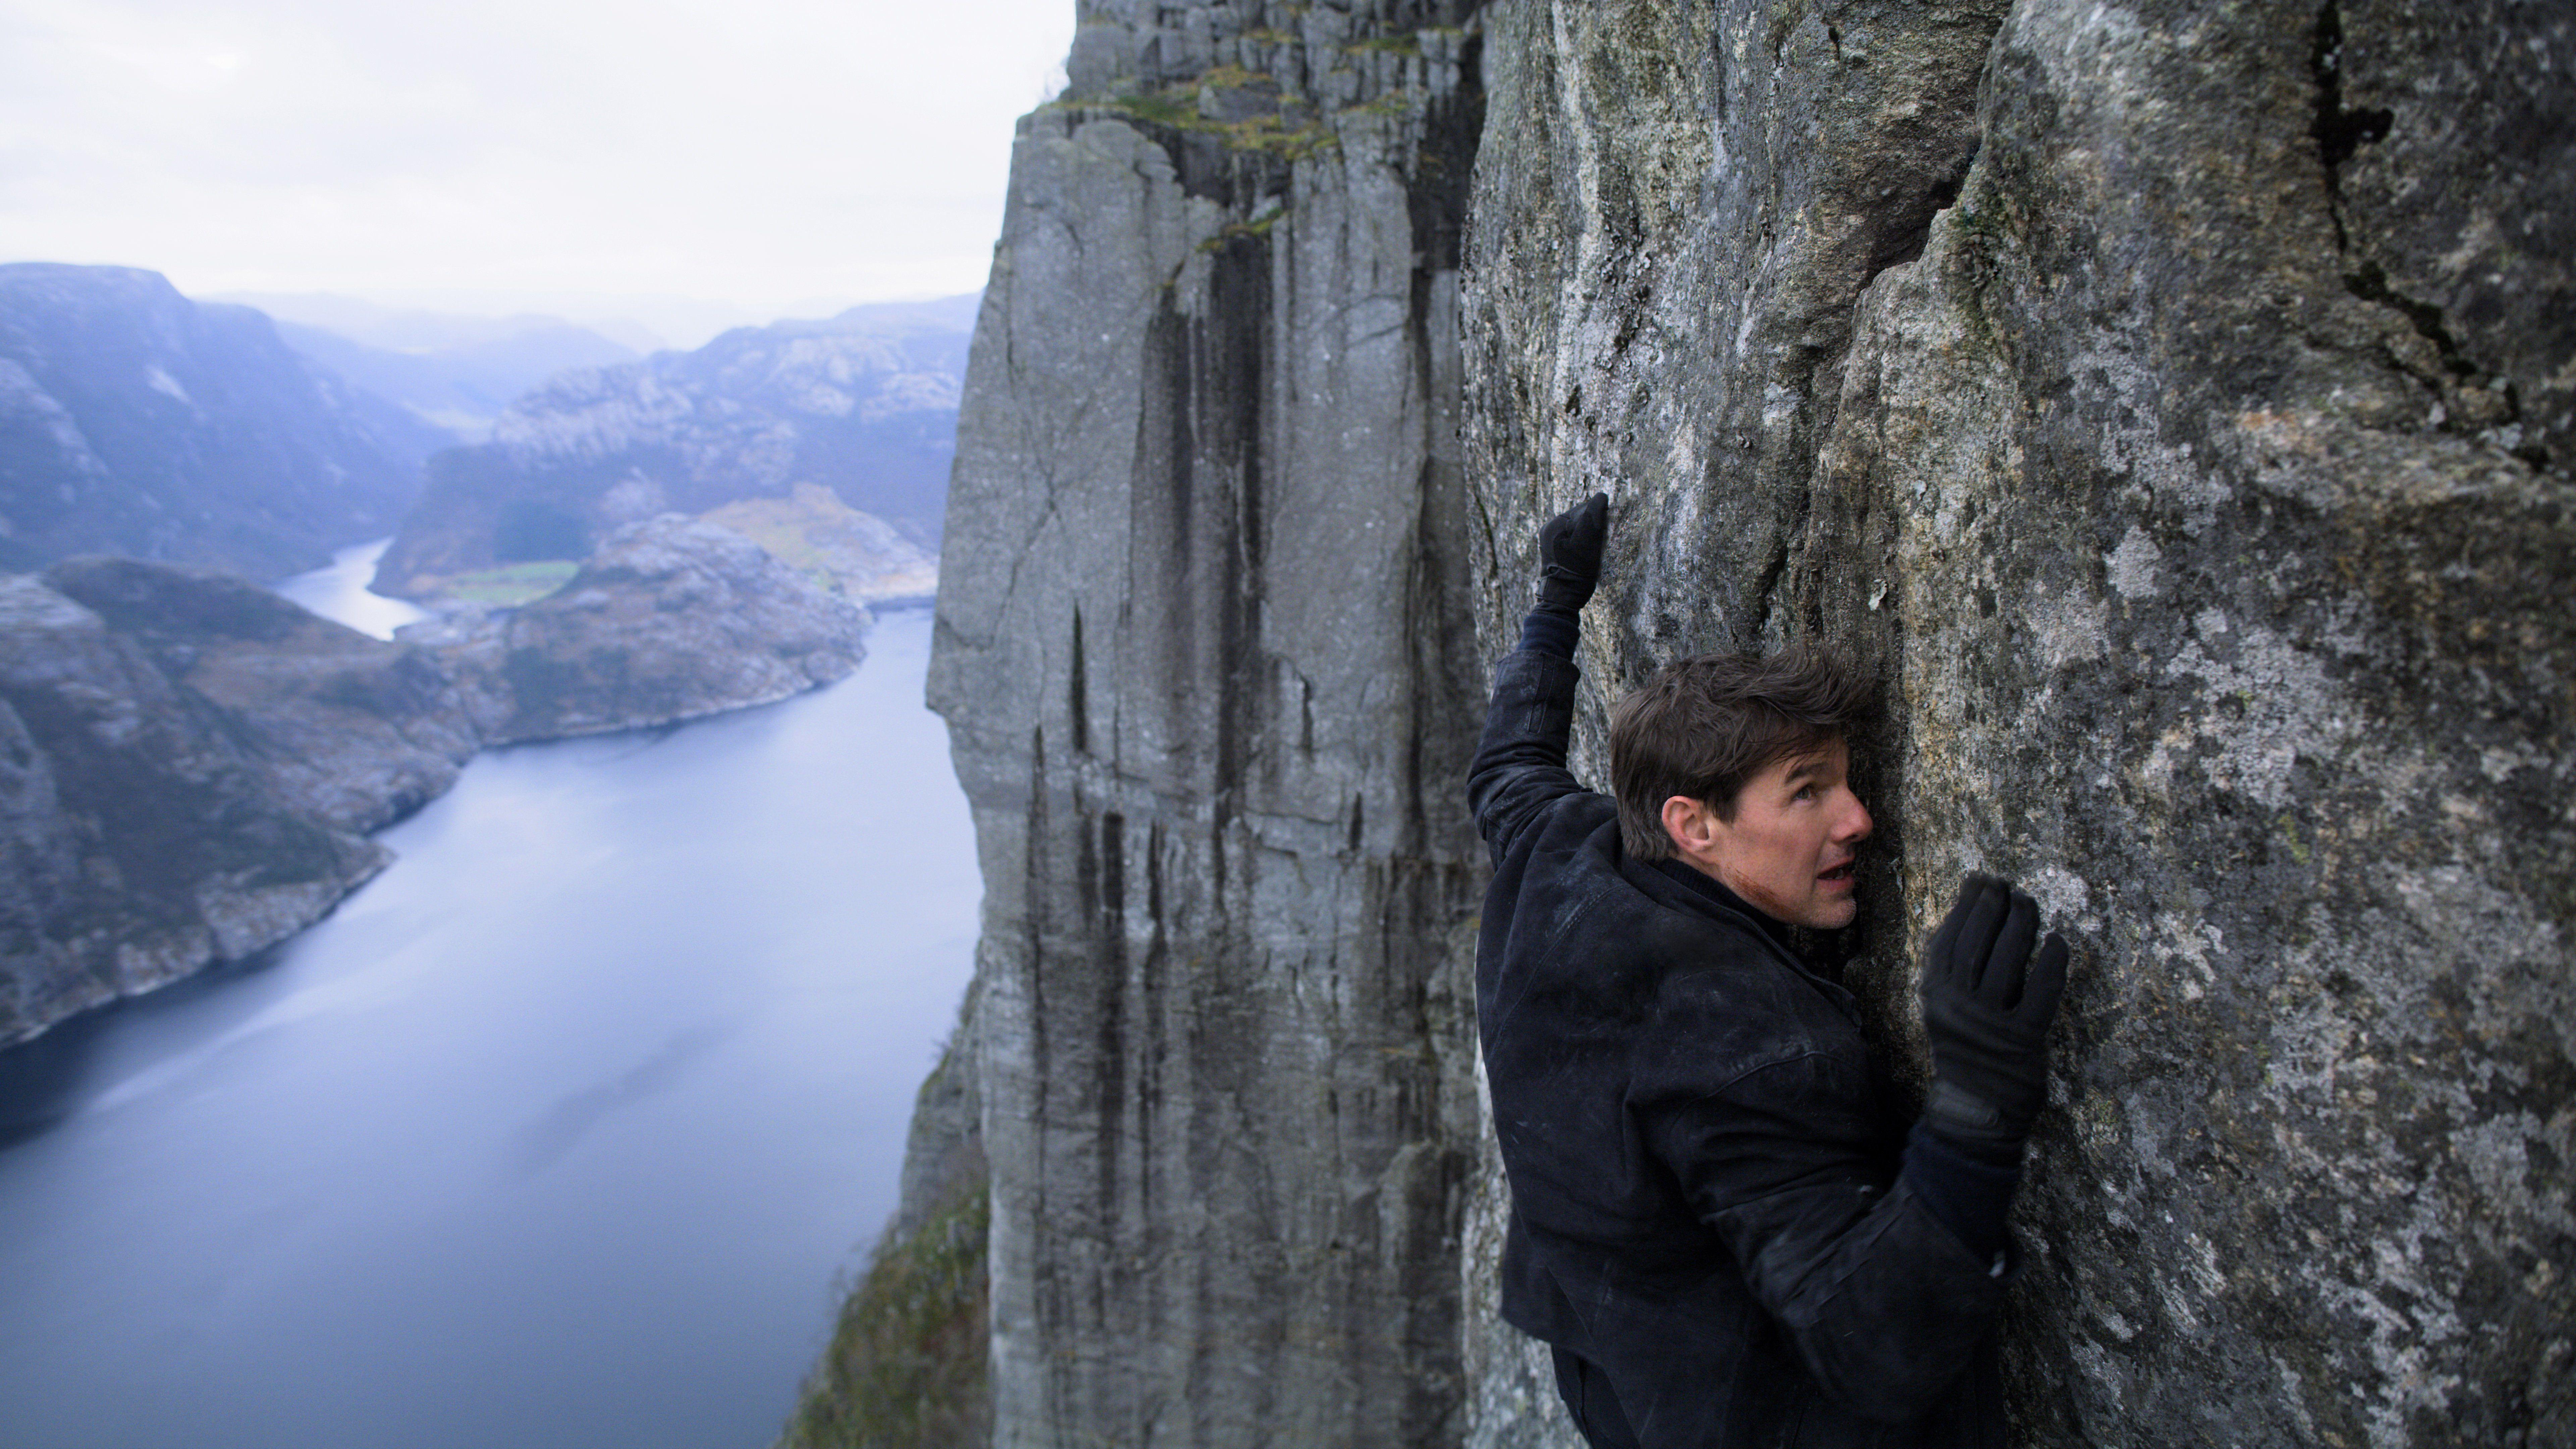 7680x4320 Tom Cruise Mission Impossible Fallout 2018 8k 8k HD 4k